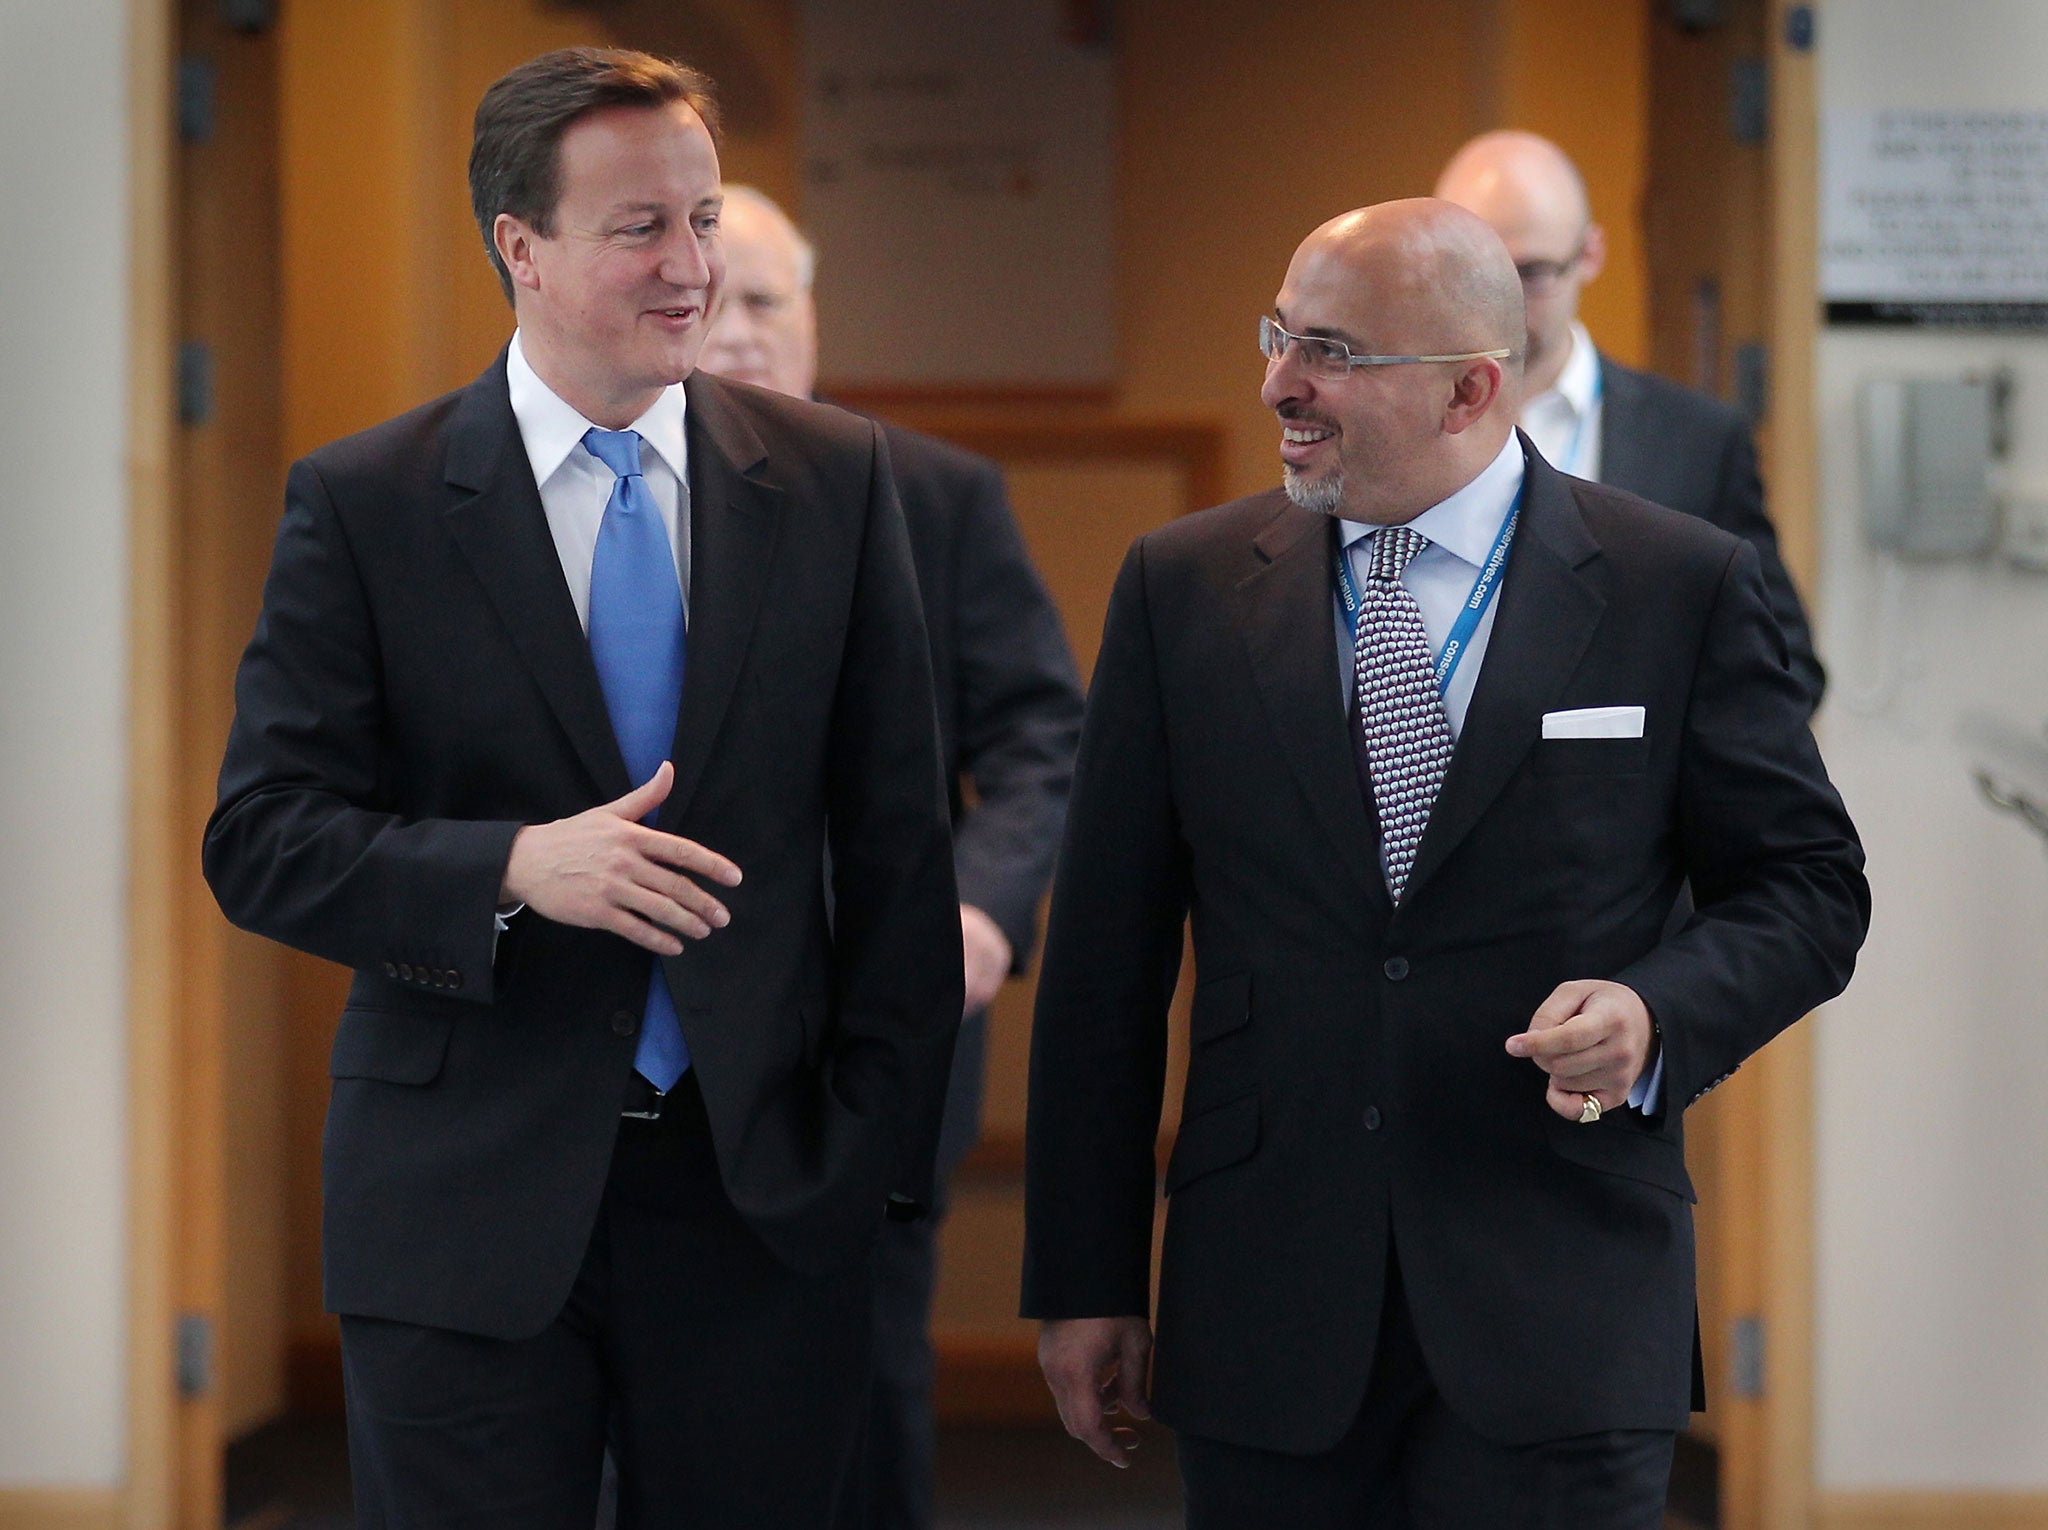 Prime Minister David Cameron (L) walks with Conservative MP Nadhim Zahawi at the Conservative Party Conference during a television interview on October 5, 2010 in Birmingham, England